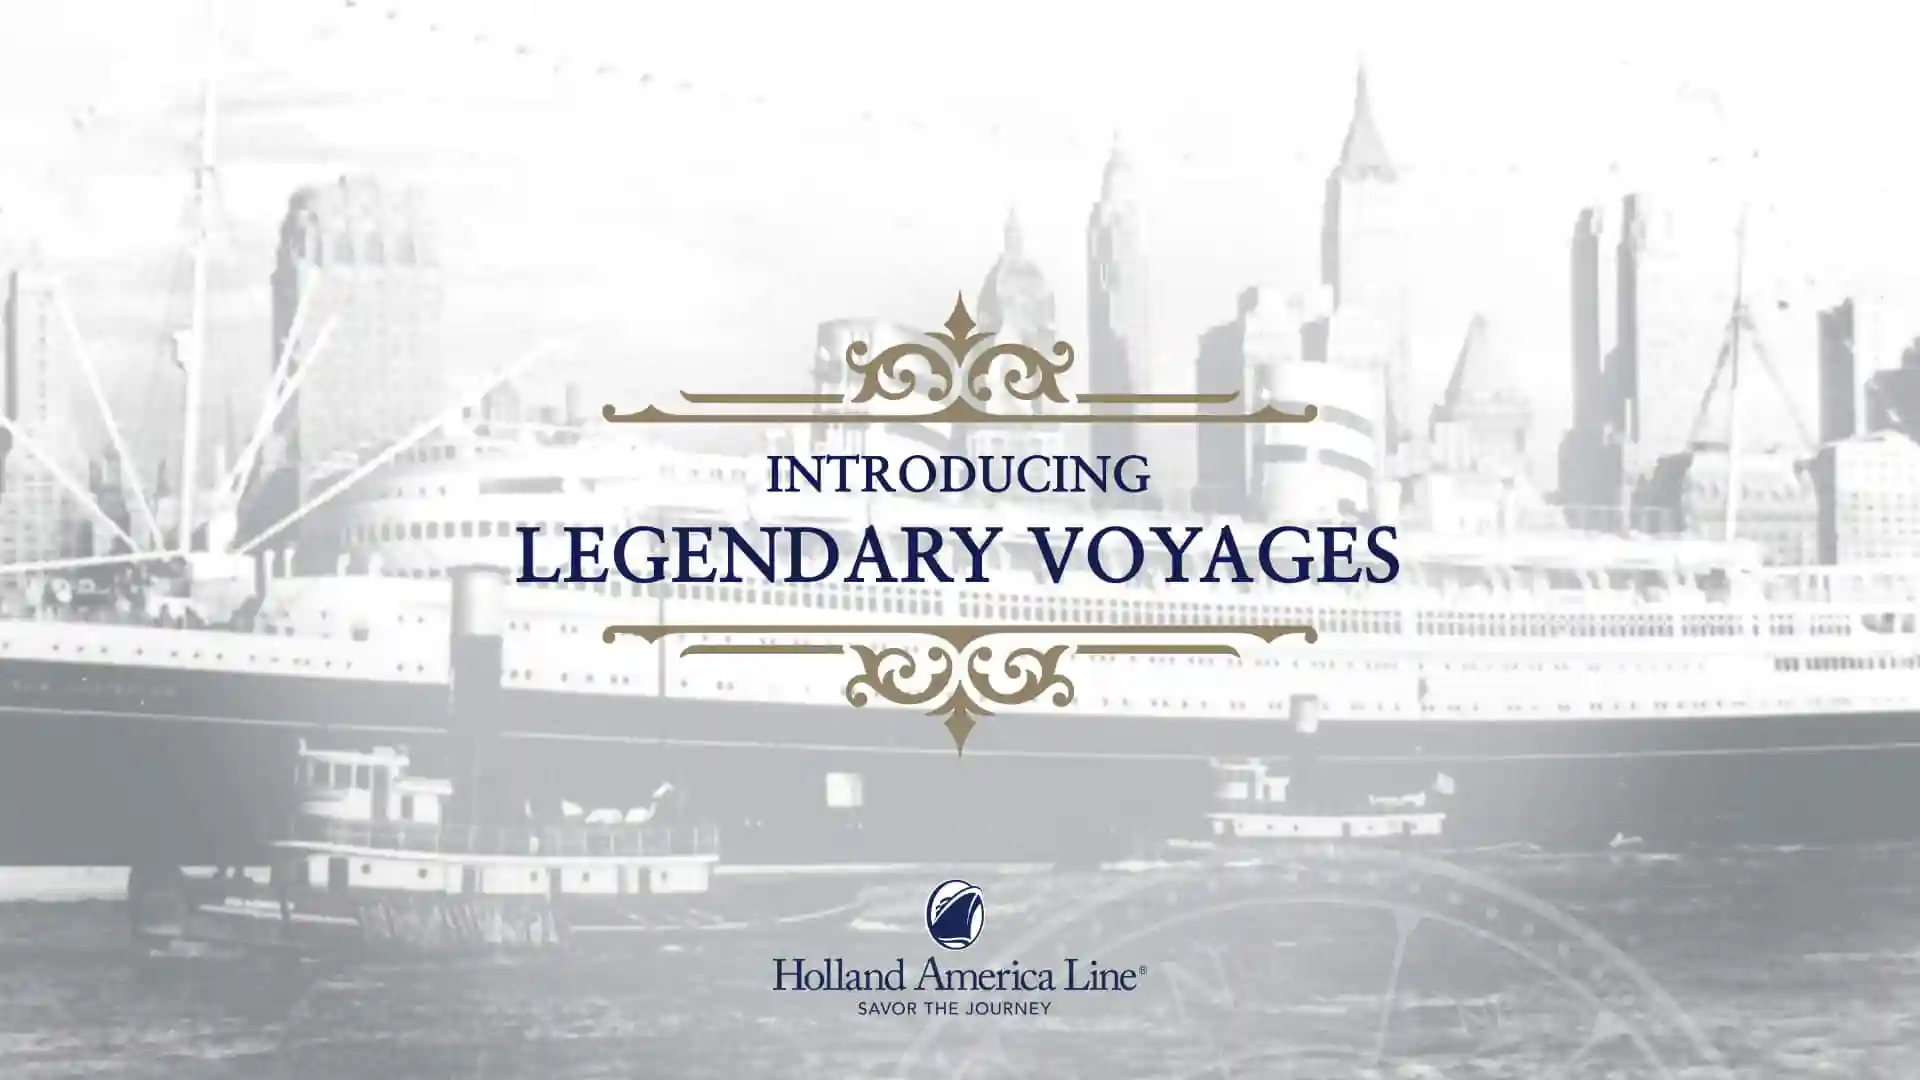 Post: Newest Voyage Category is Truly Legendary